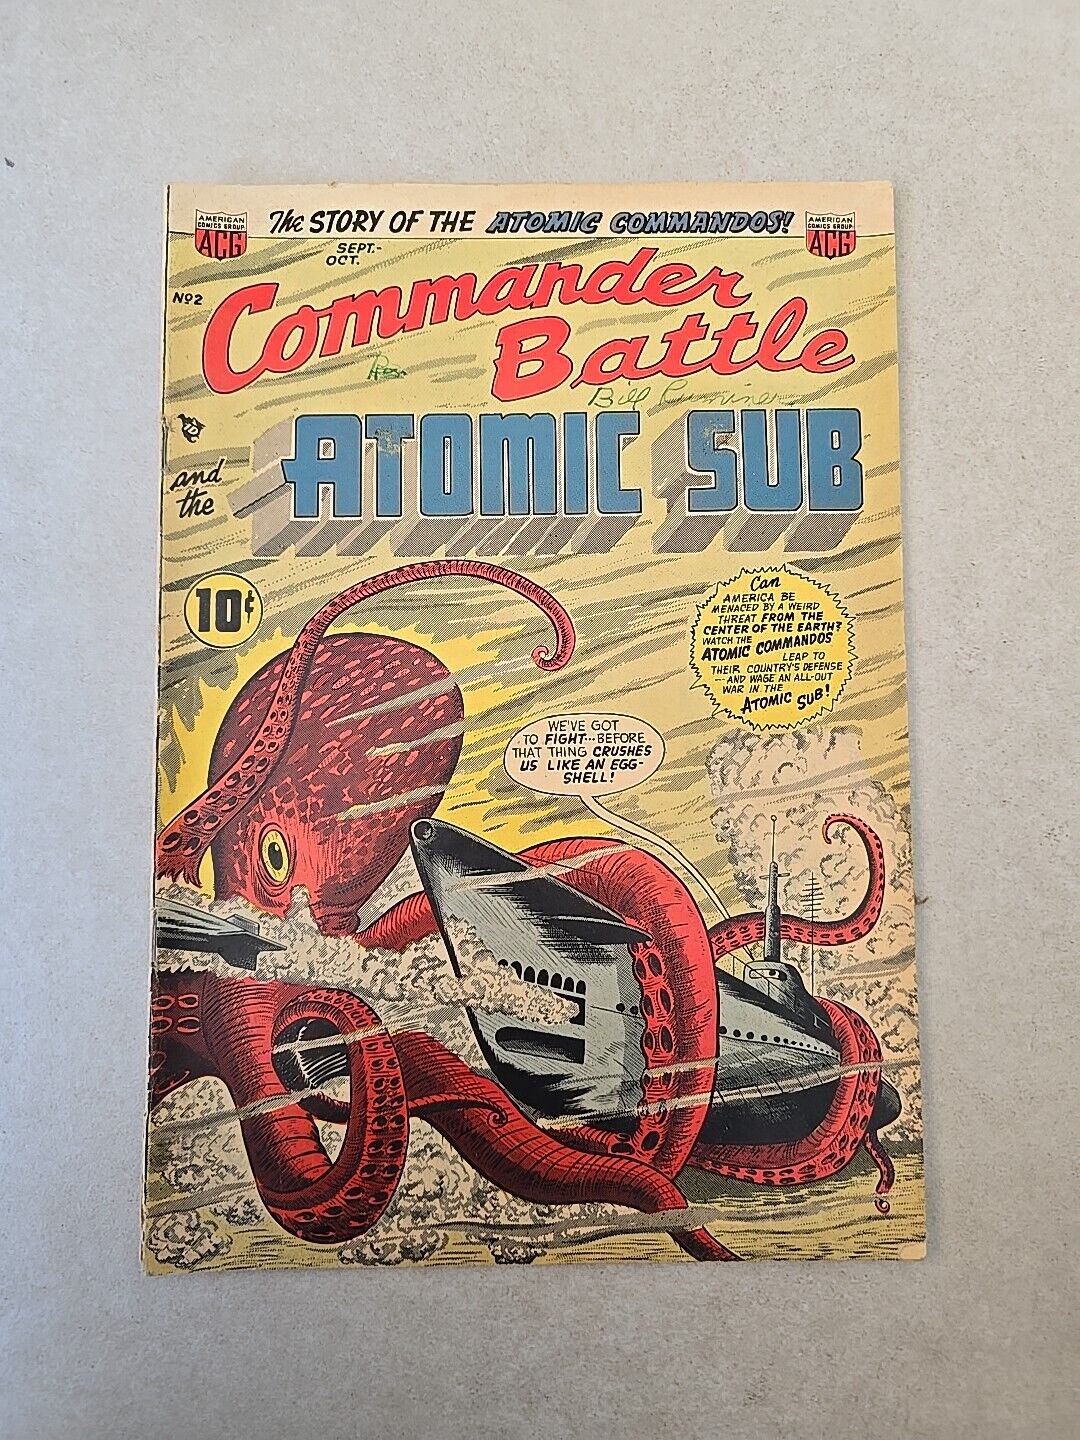 Commander Battle and the Atomic Submarine #2  1954 Golden Age Comic Book